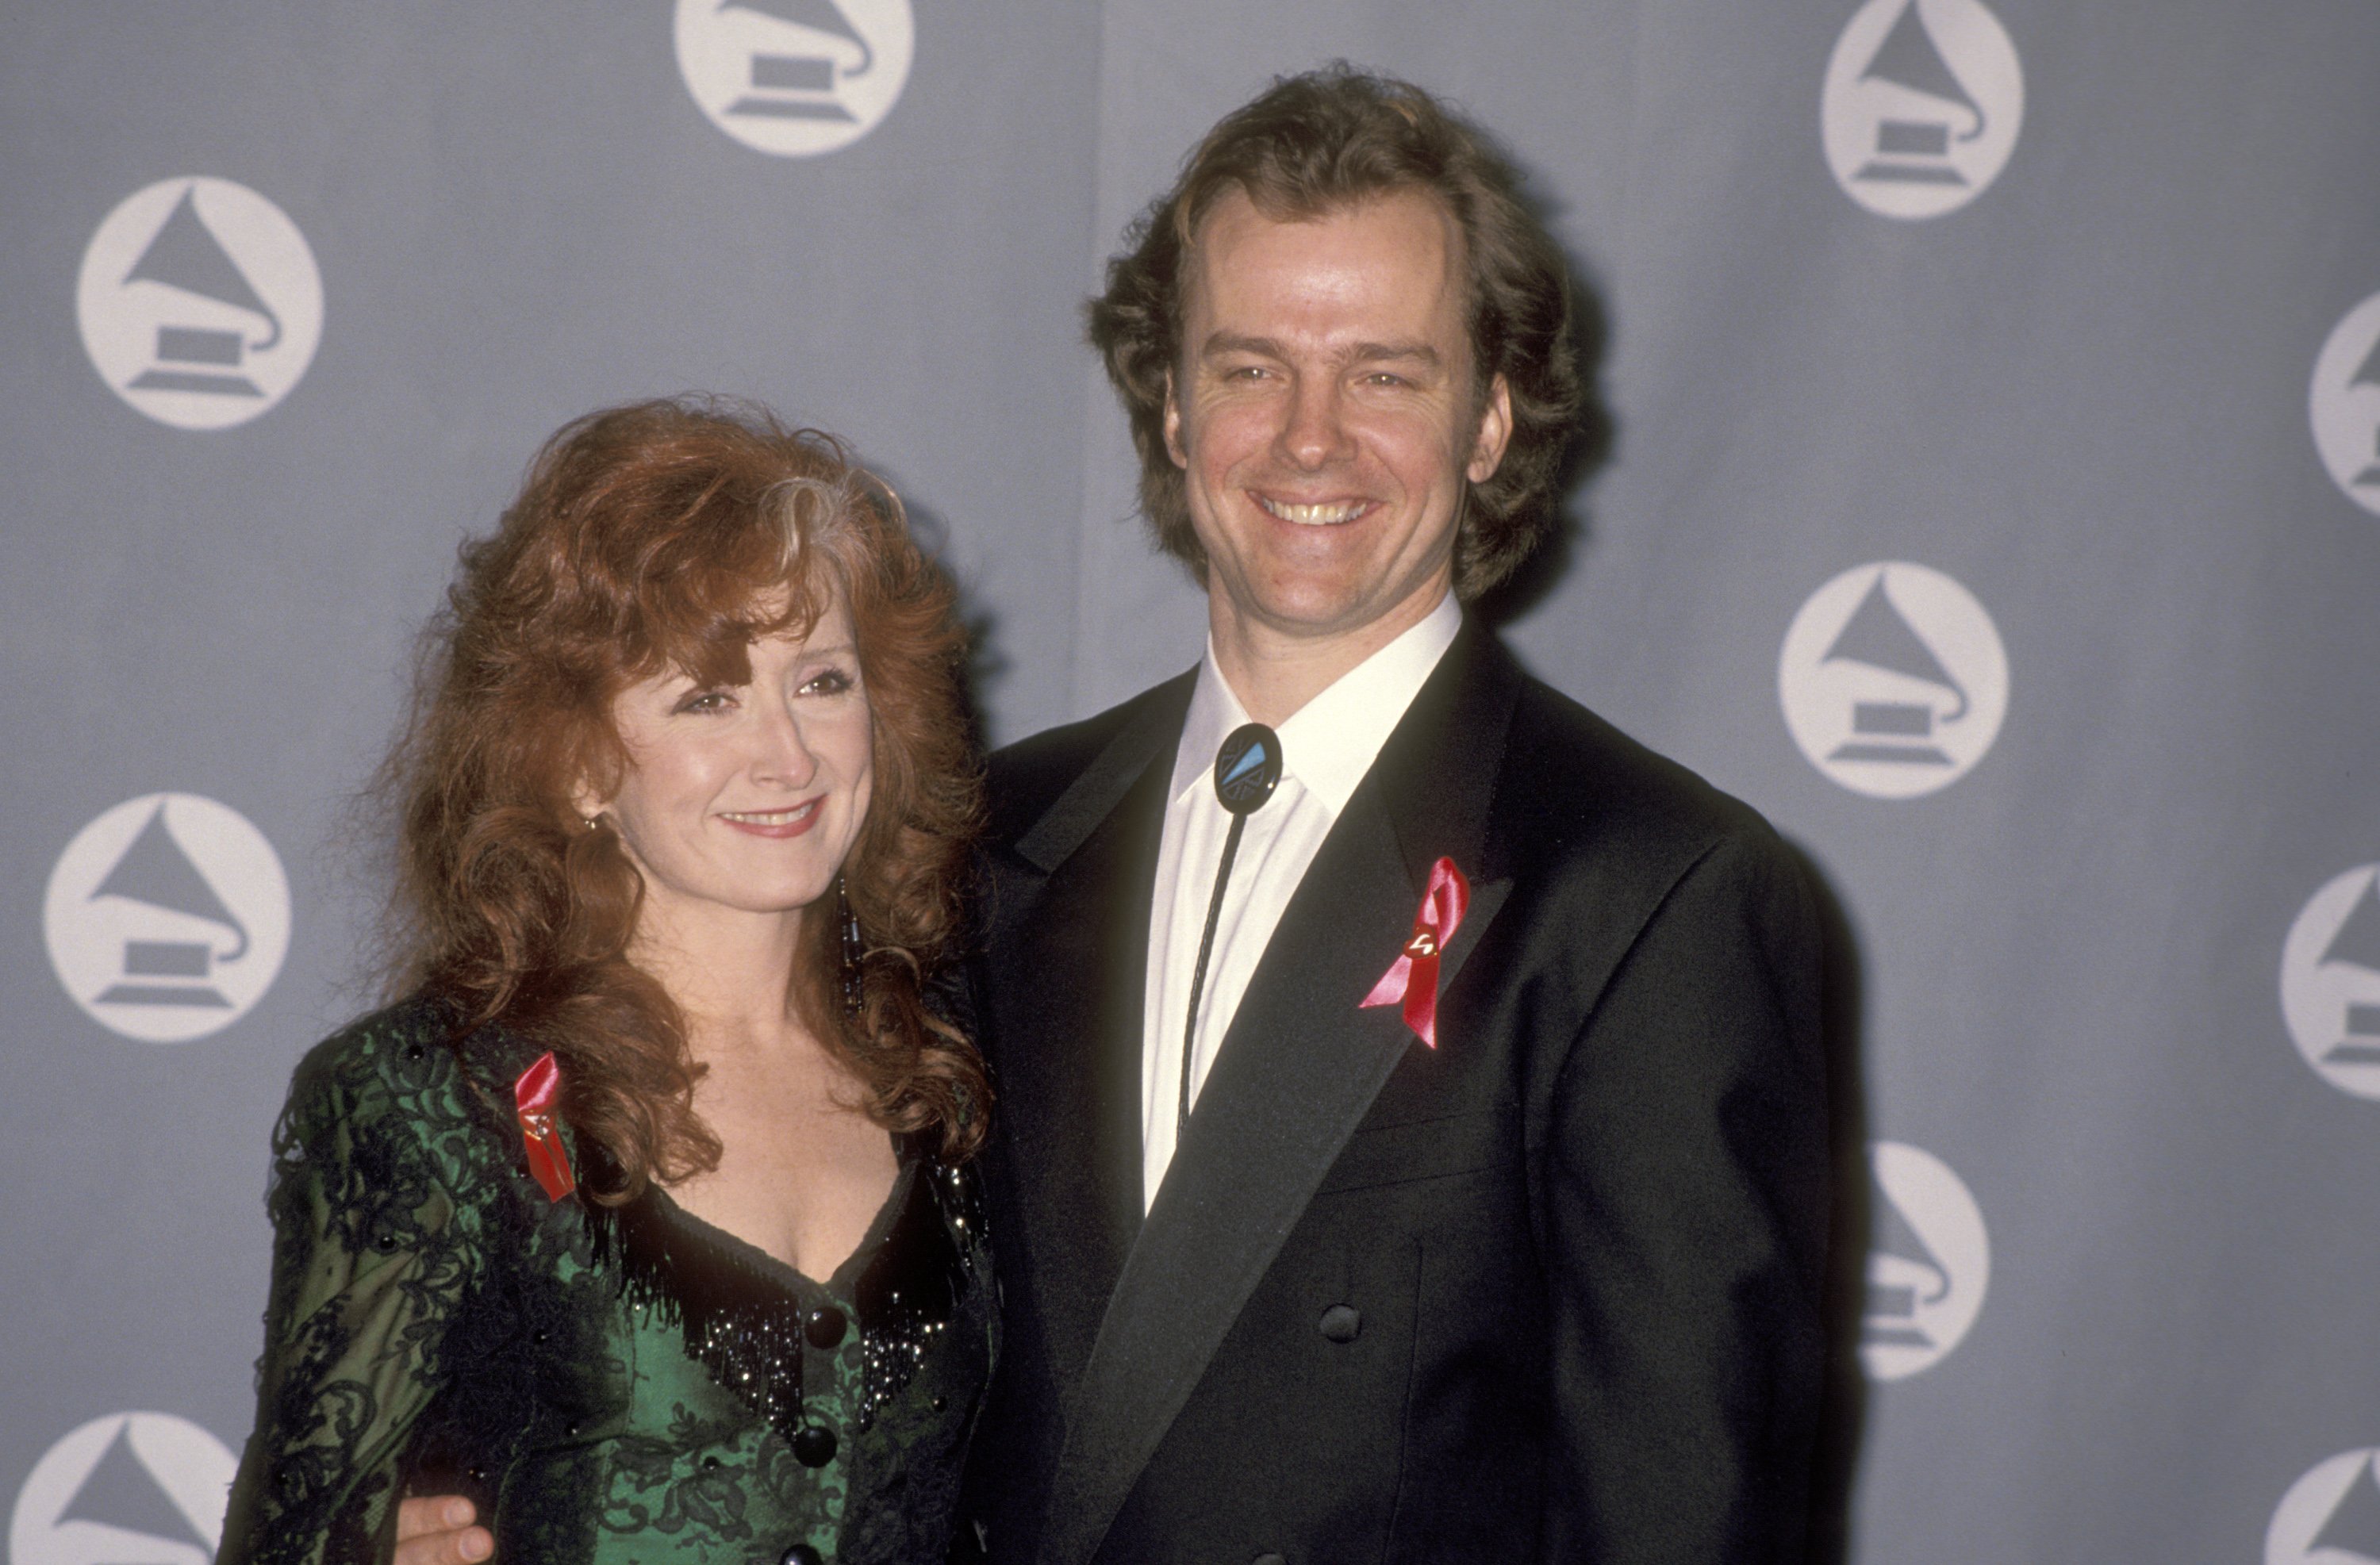 Bonnie Raitt and Michael O'Keefe attend the 35th Annual Grammy Awards on February 24, 1993, at Shrine Auditorium in Los Angeles, California | Source: Getty Images